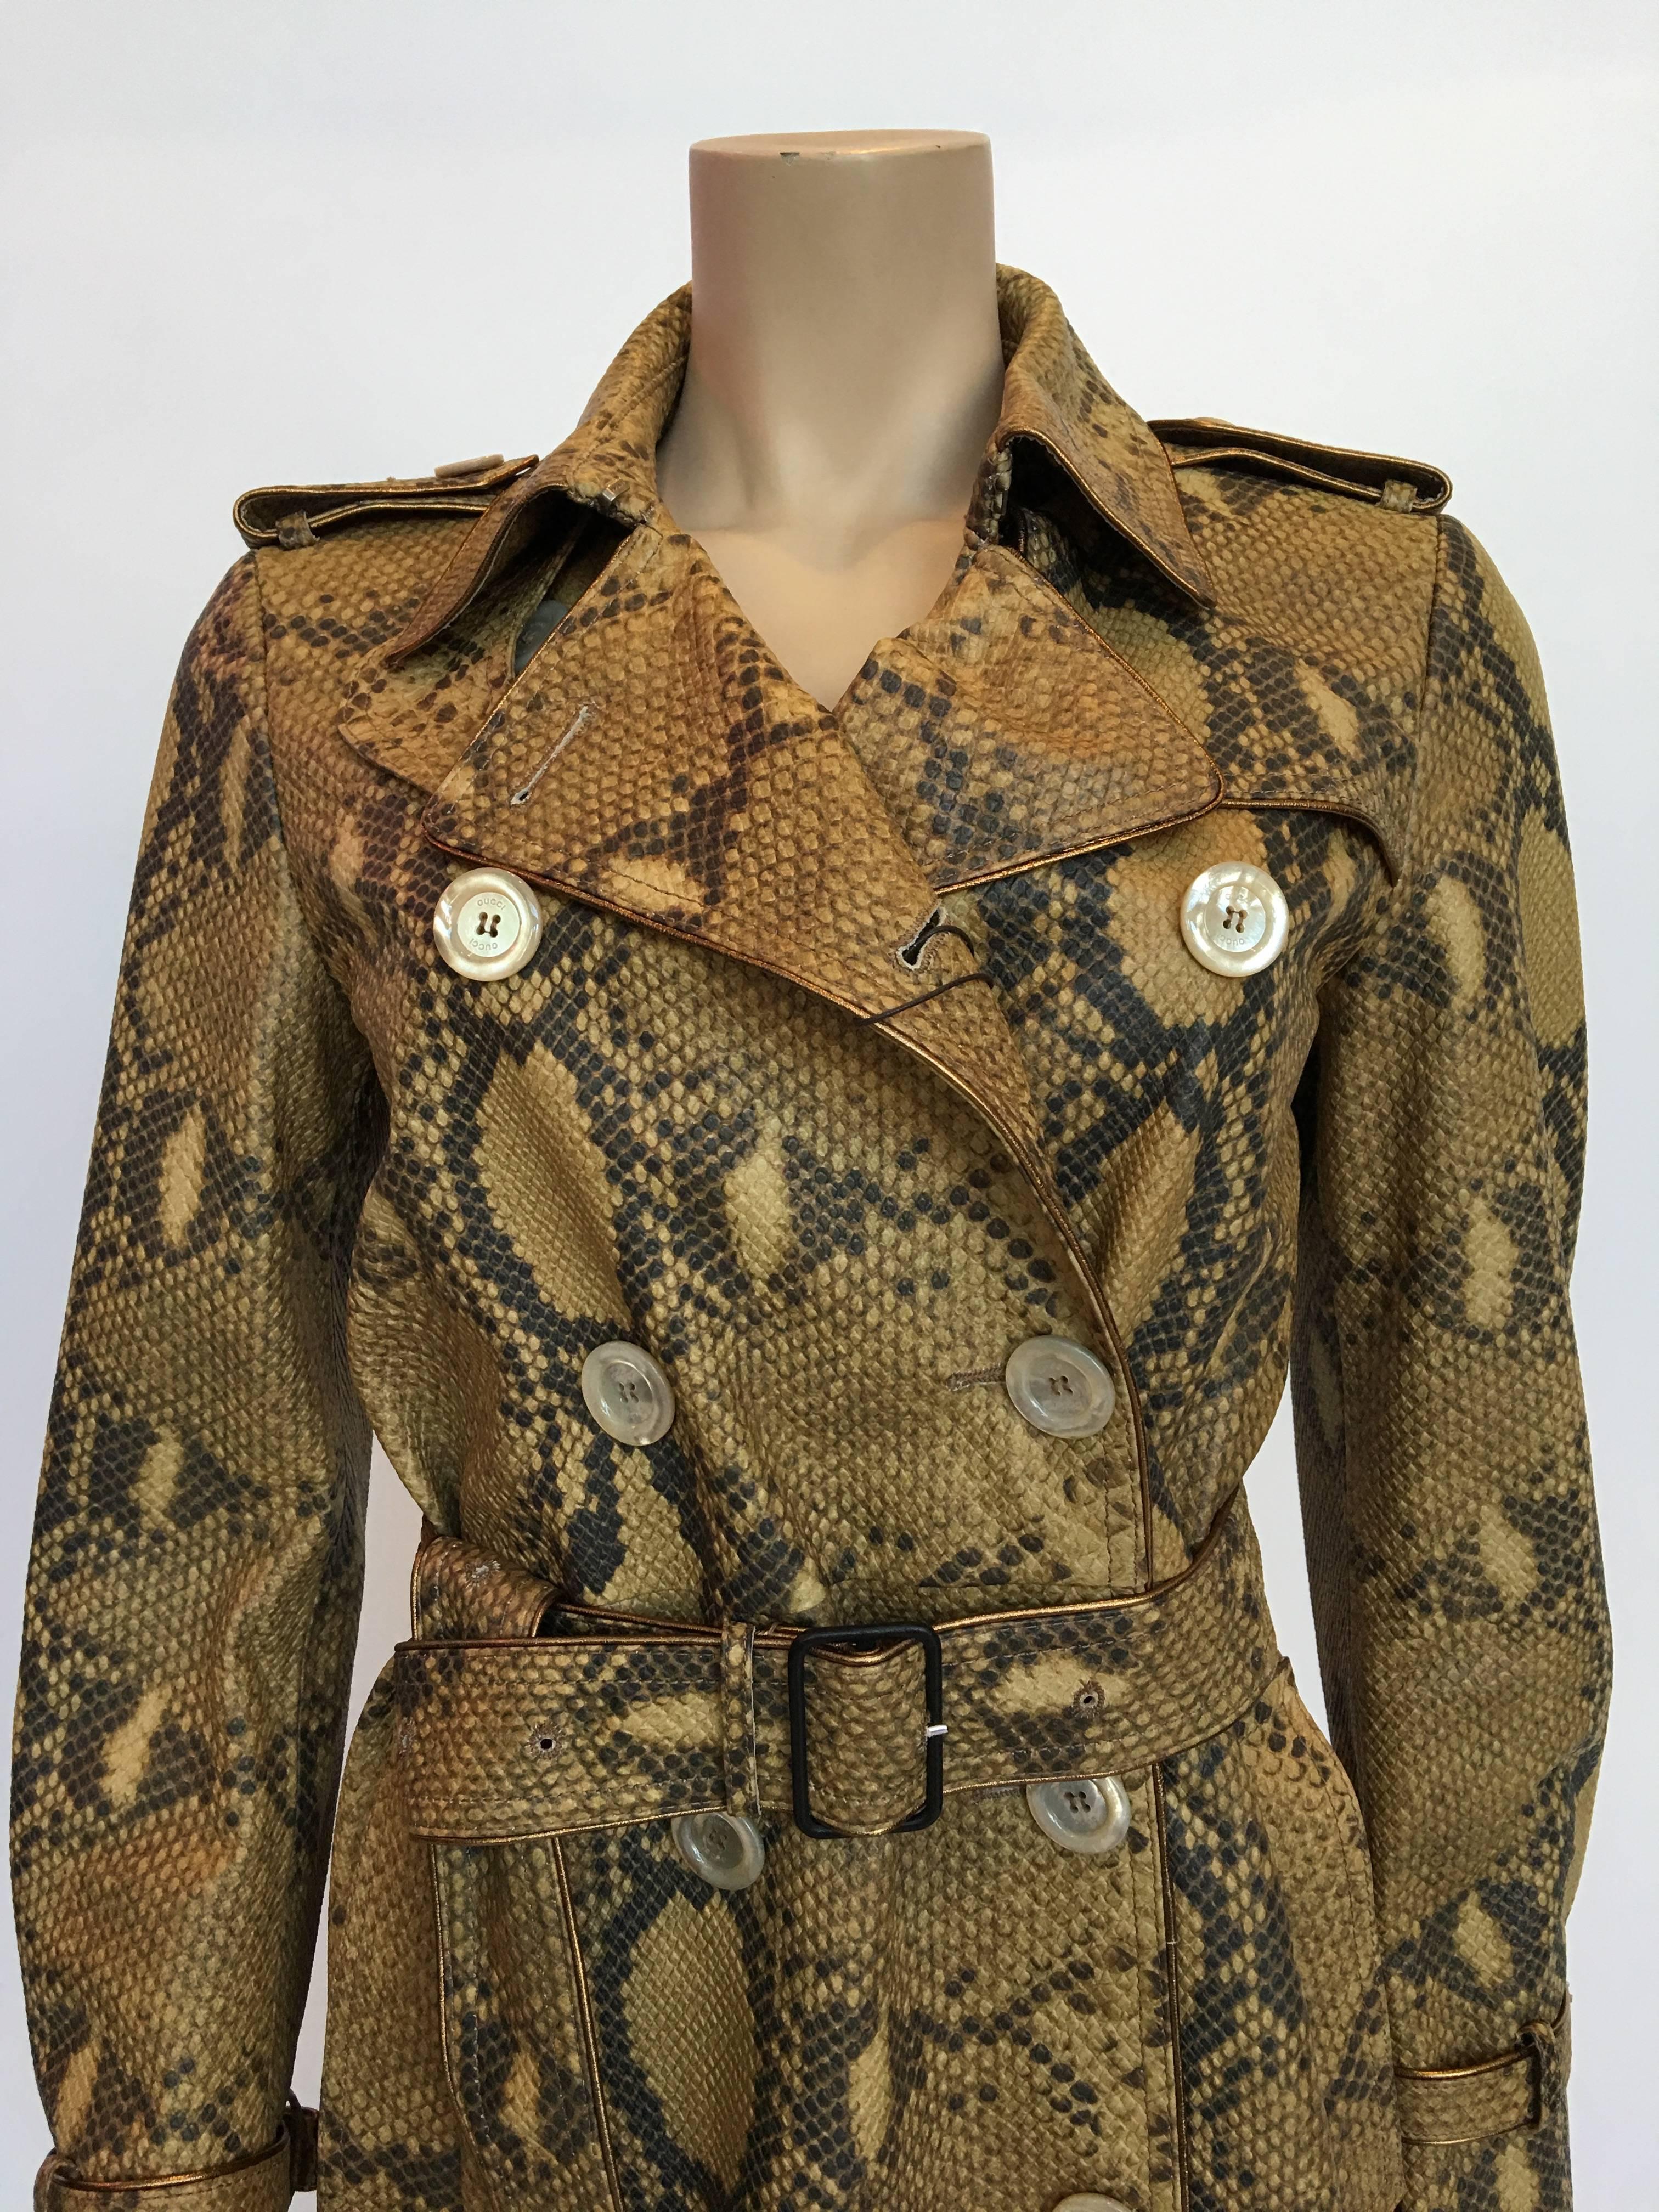 GUCCI Leather Snake Skin Print Trench

Size Label : 42
Made in Italy
Size Label : 42 
Dusty rose silk lining

Measurements *ALL MEASUREMENTS TAKEN FLAT*
Shoulders ( Seam to seam ) : 15